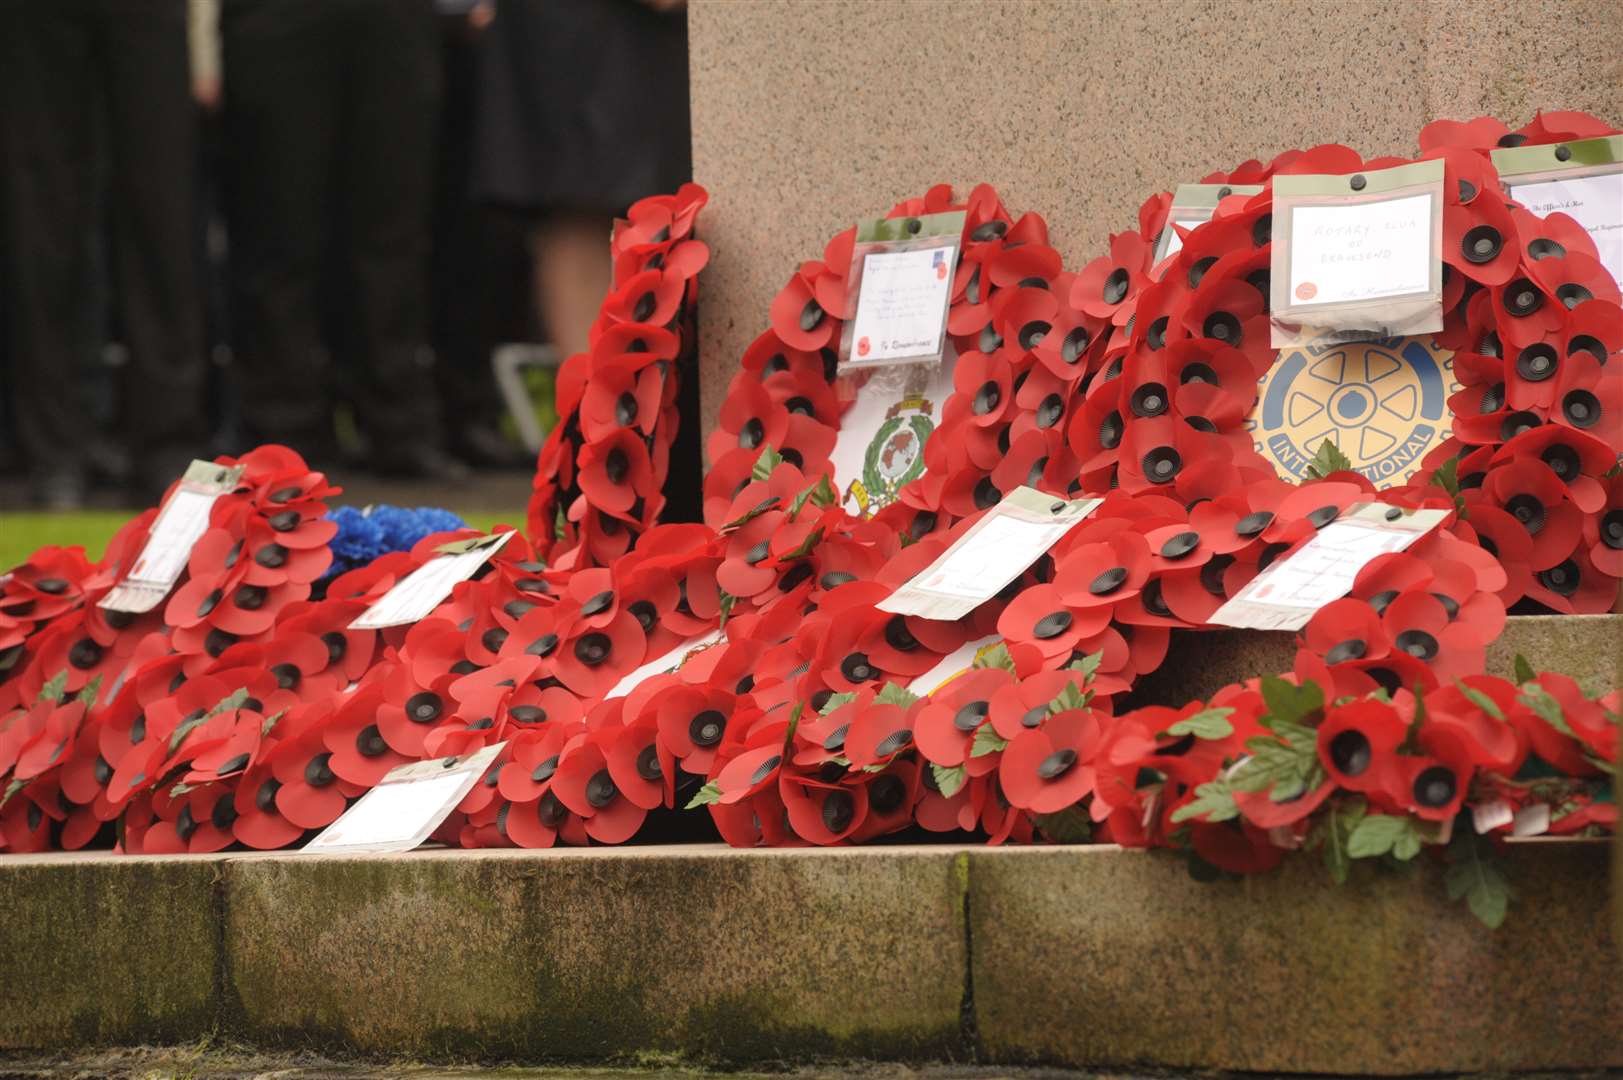 Armistice Day wase marked by a service in the Community Square